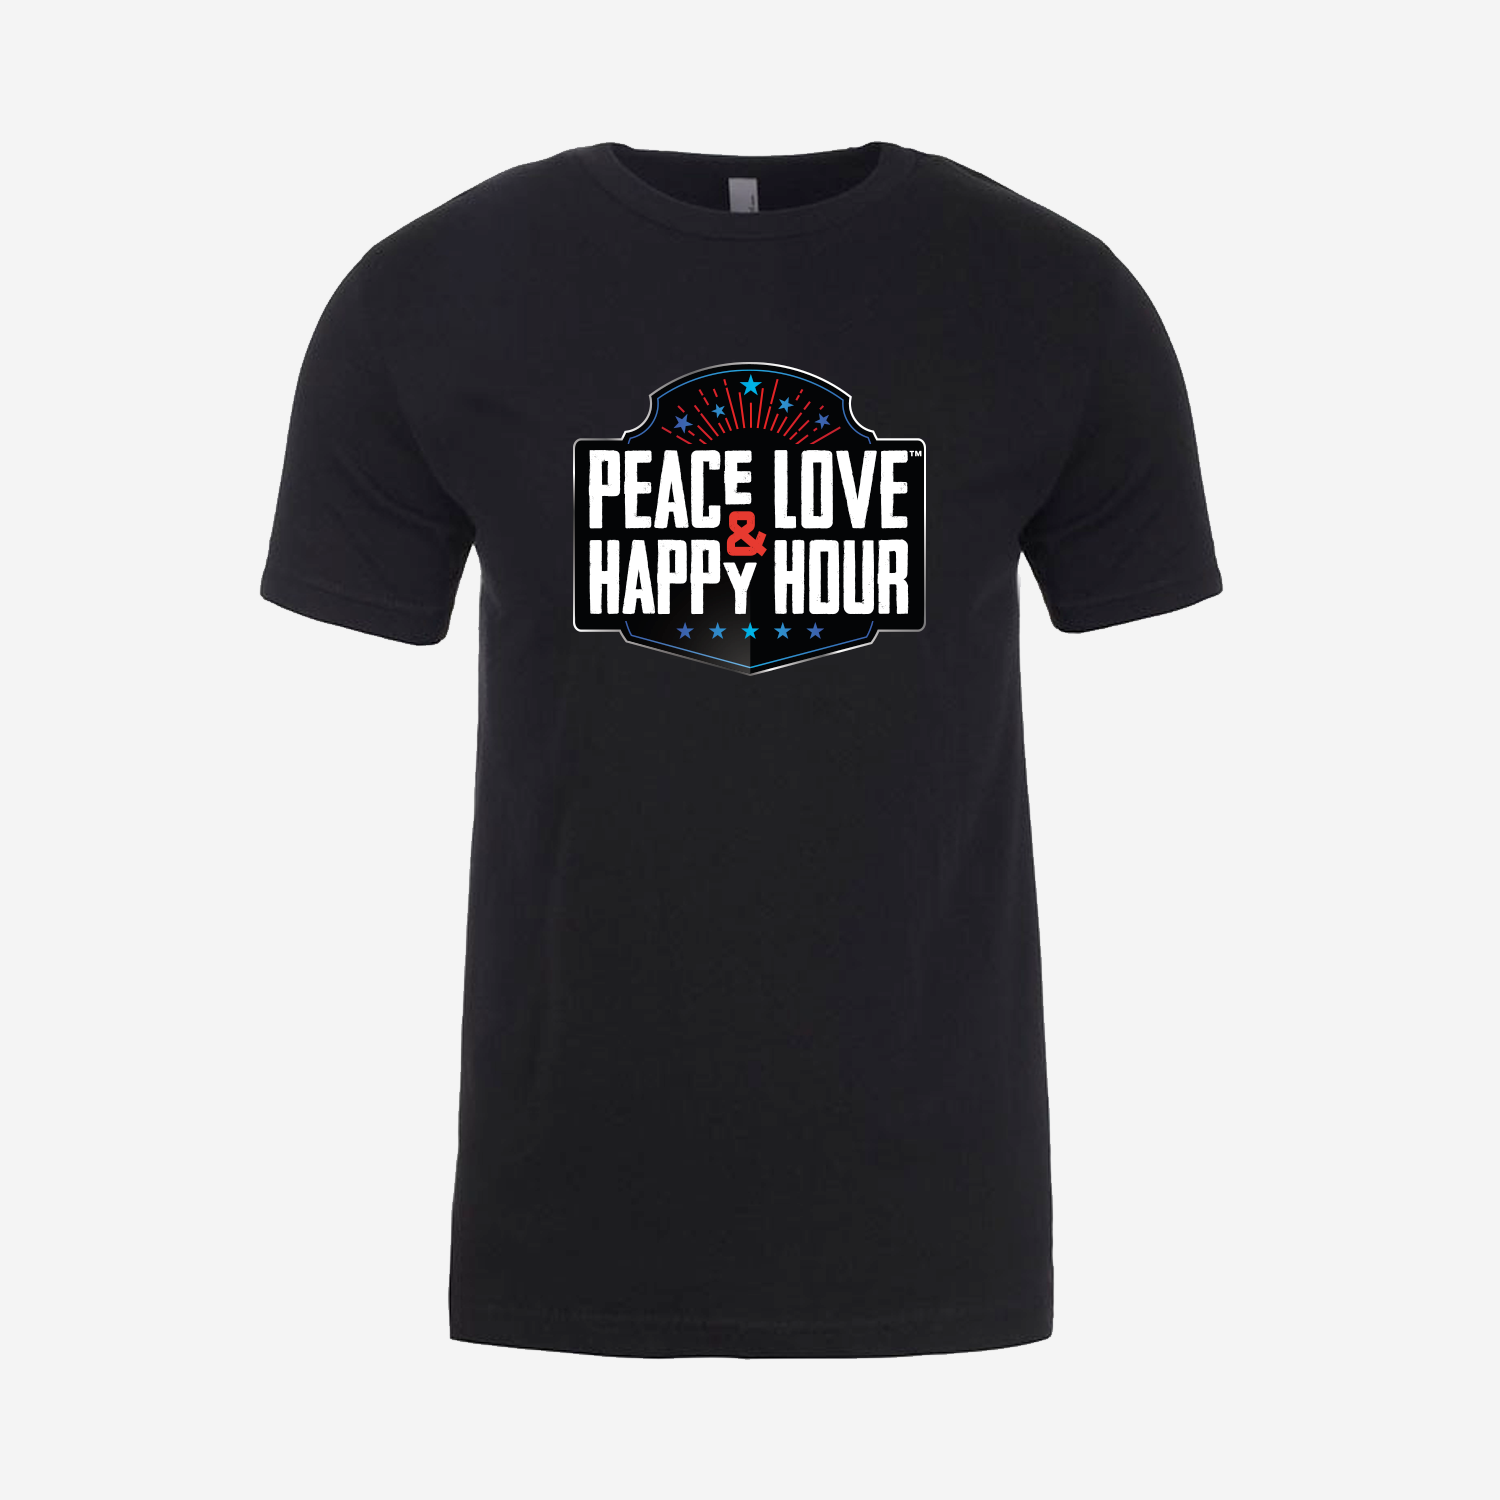 Badlands T-Shirt – Peace Love and Happy Hour